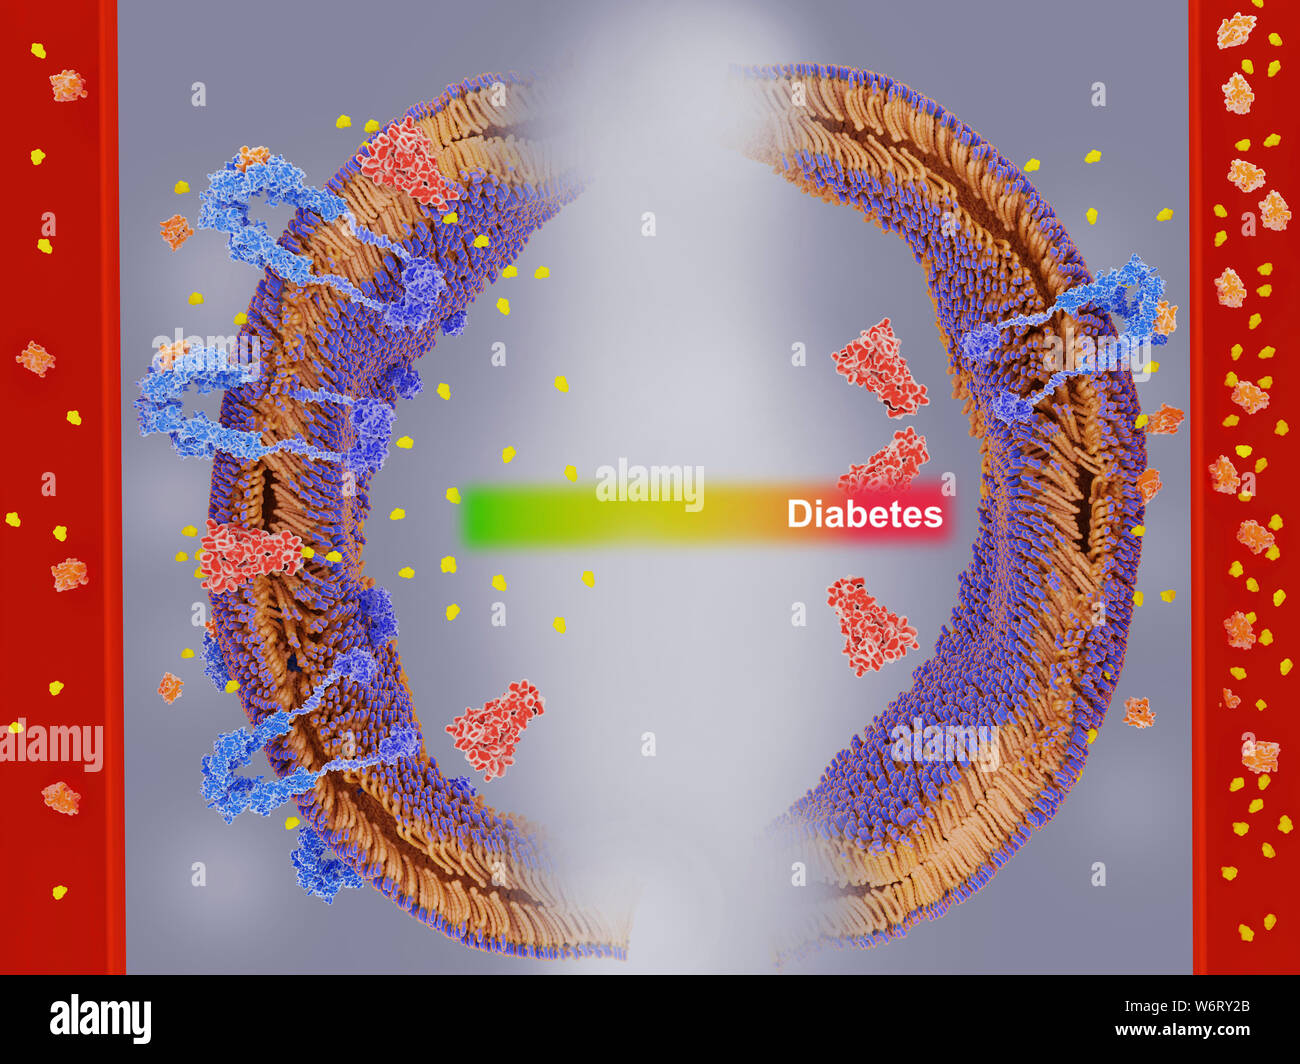 Diabetes caused by insulin resistance, illustration. Insulin resistance (IR) is a pathological condition where cells cannot respond normally to the ho Stock Photo